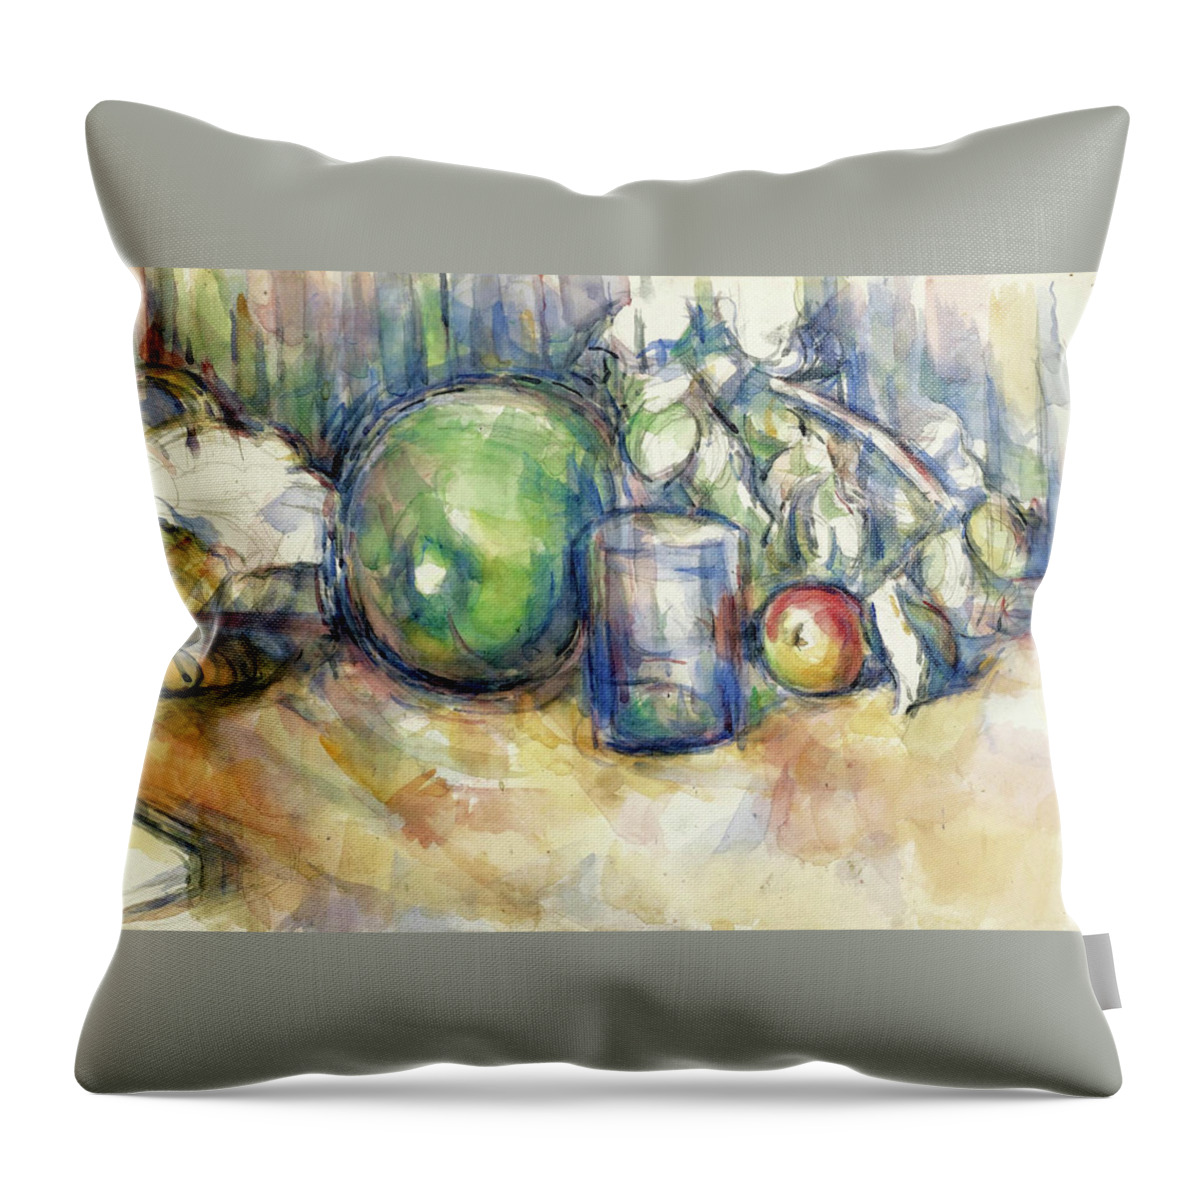 Paul Cezanne Throw Pillow featuring the painting Still Life with Green Melon by Paul Cezanne